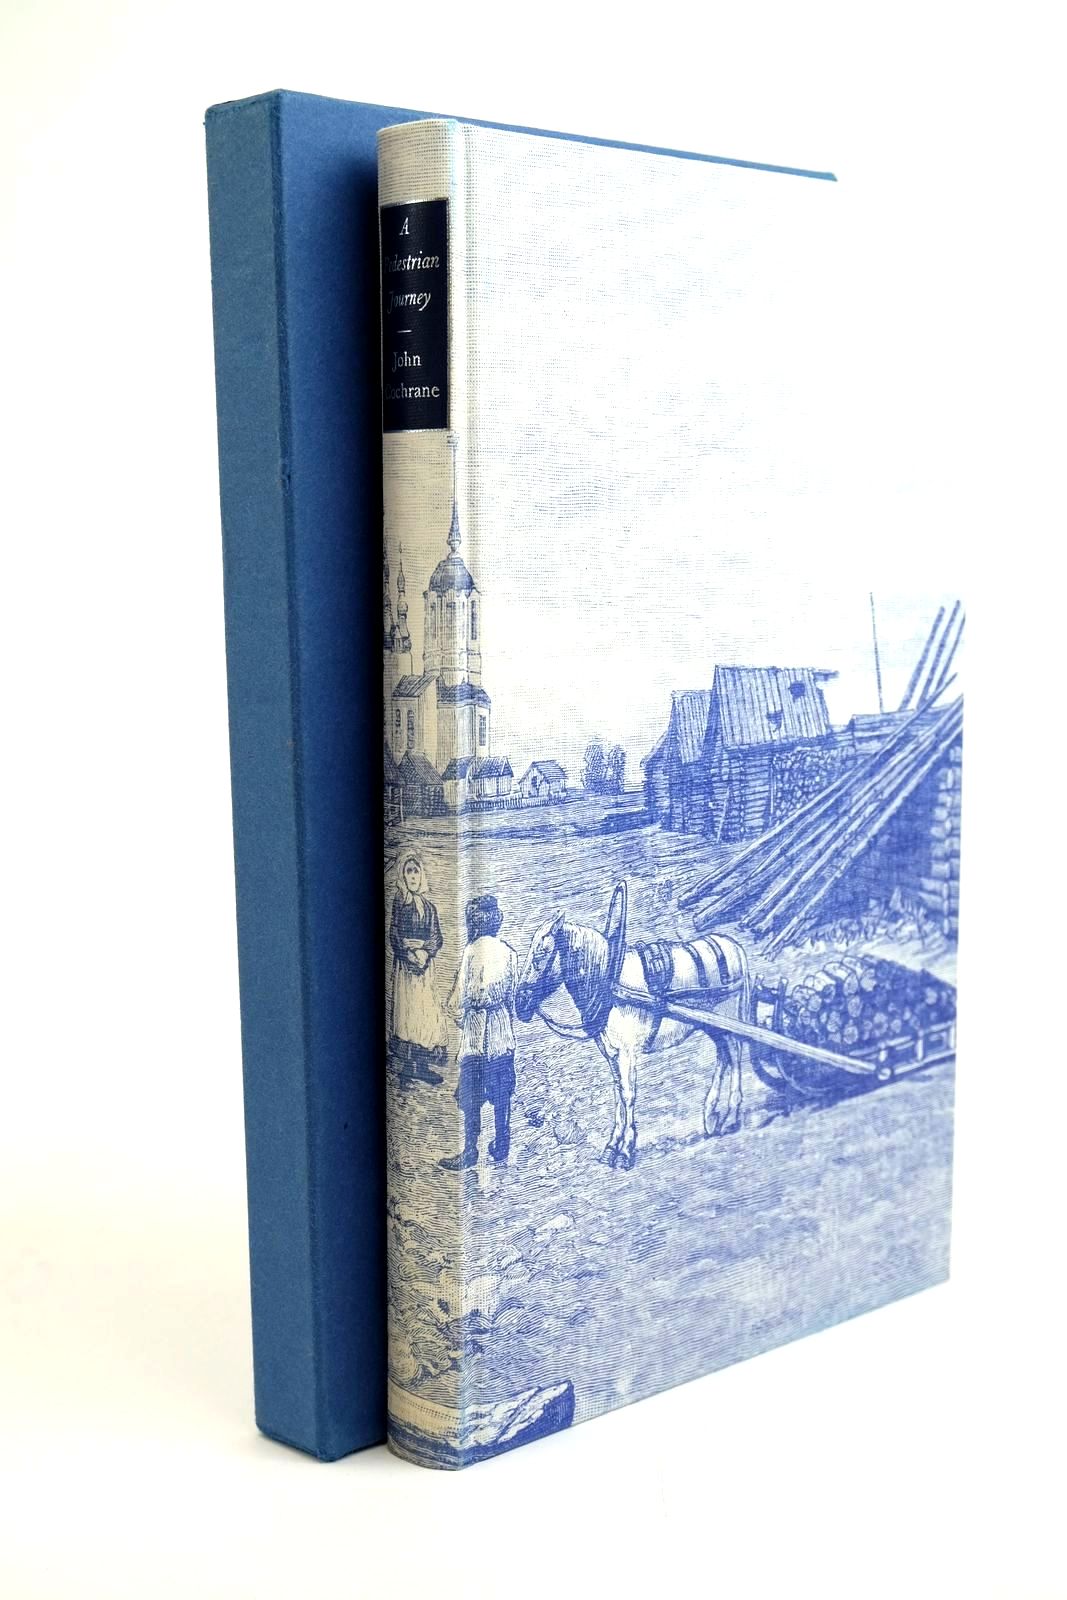 Photo of A PEDESTRIAN JOURNEY written by Cochrane, John Dundas Horder, Mervyn published by Folio Society (STOCK CODE: 1321377)  for sale by Stella & Rose's Books